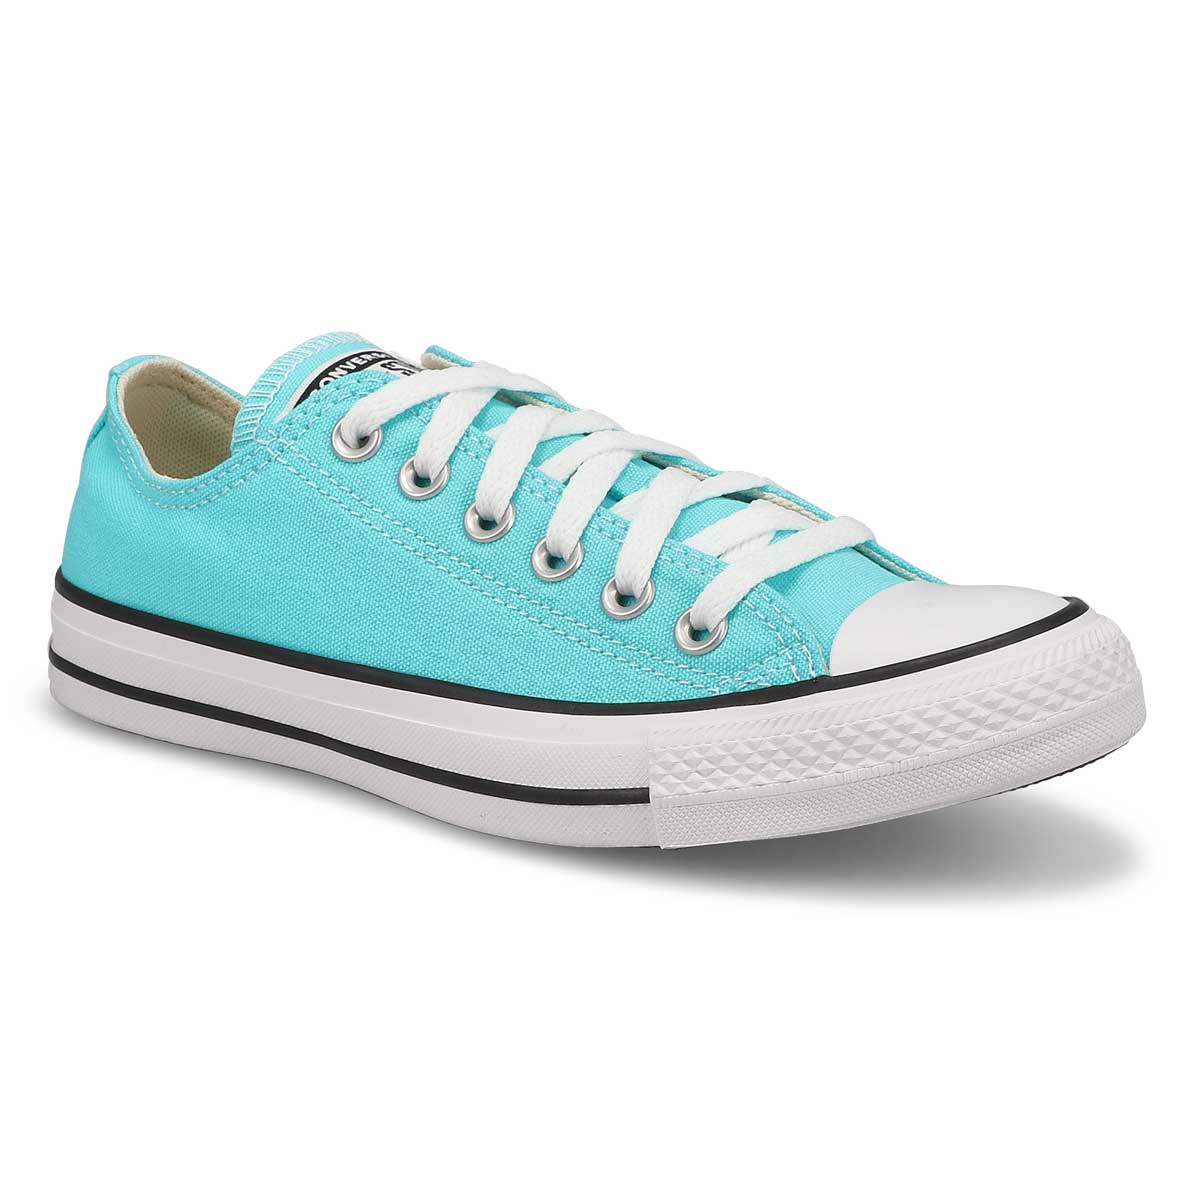 Ladies Chuck Taylor All Star Sneaker - Double Cyan